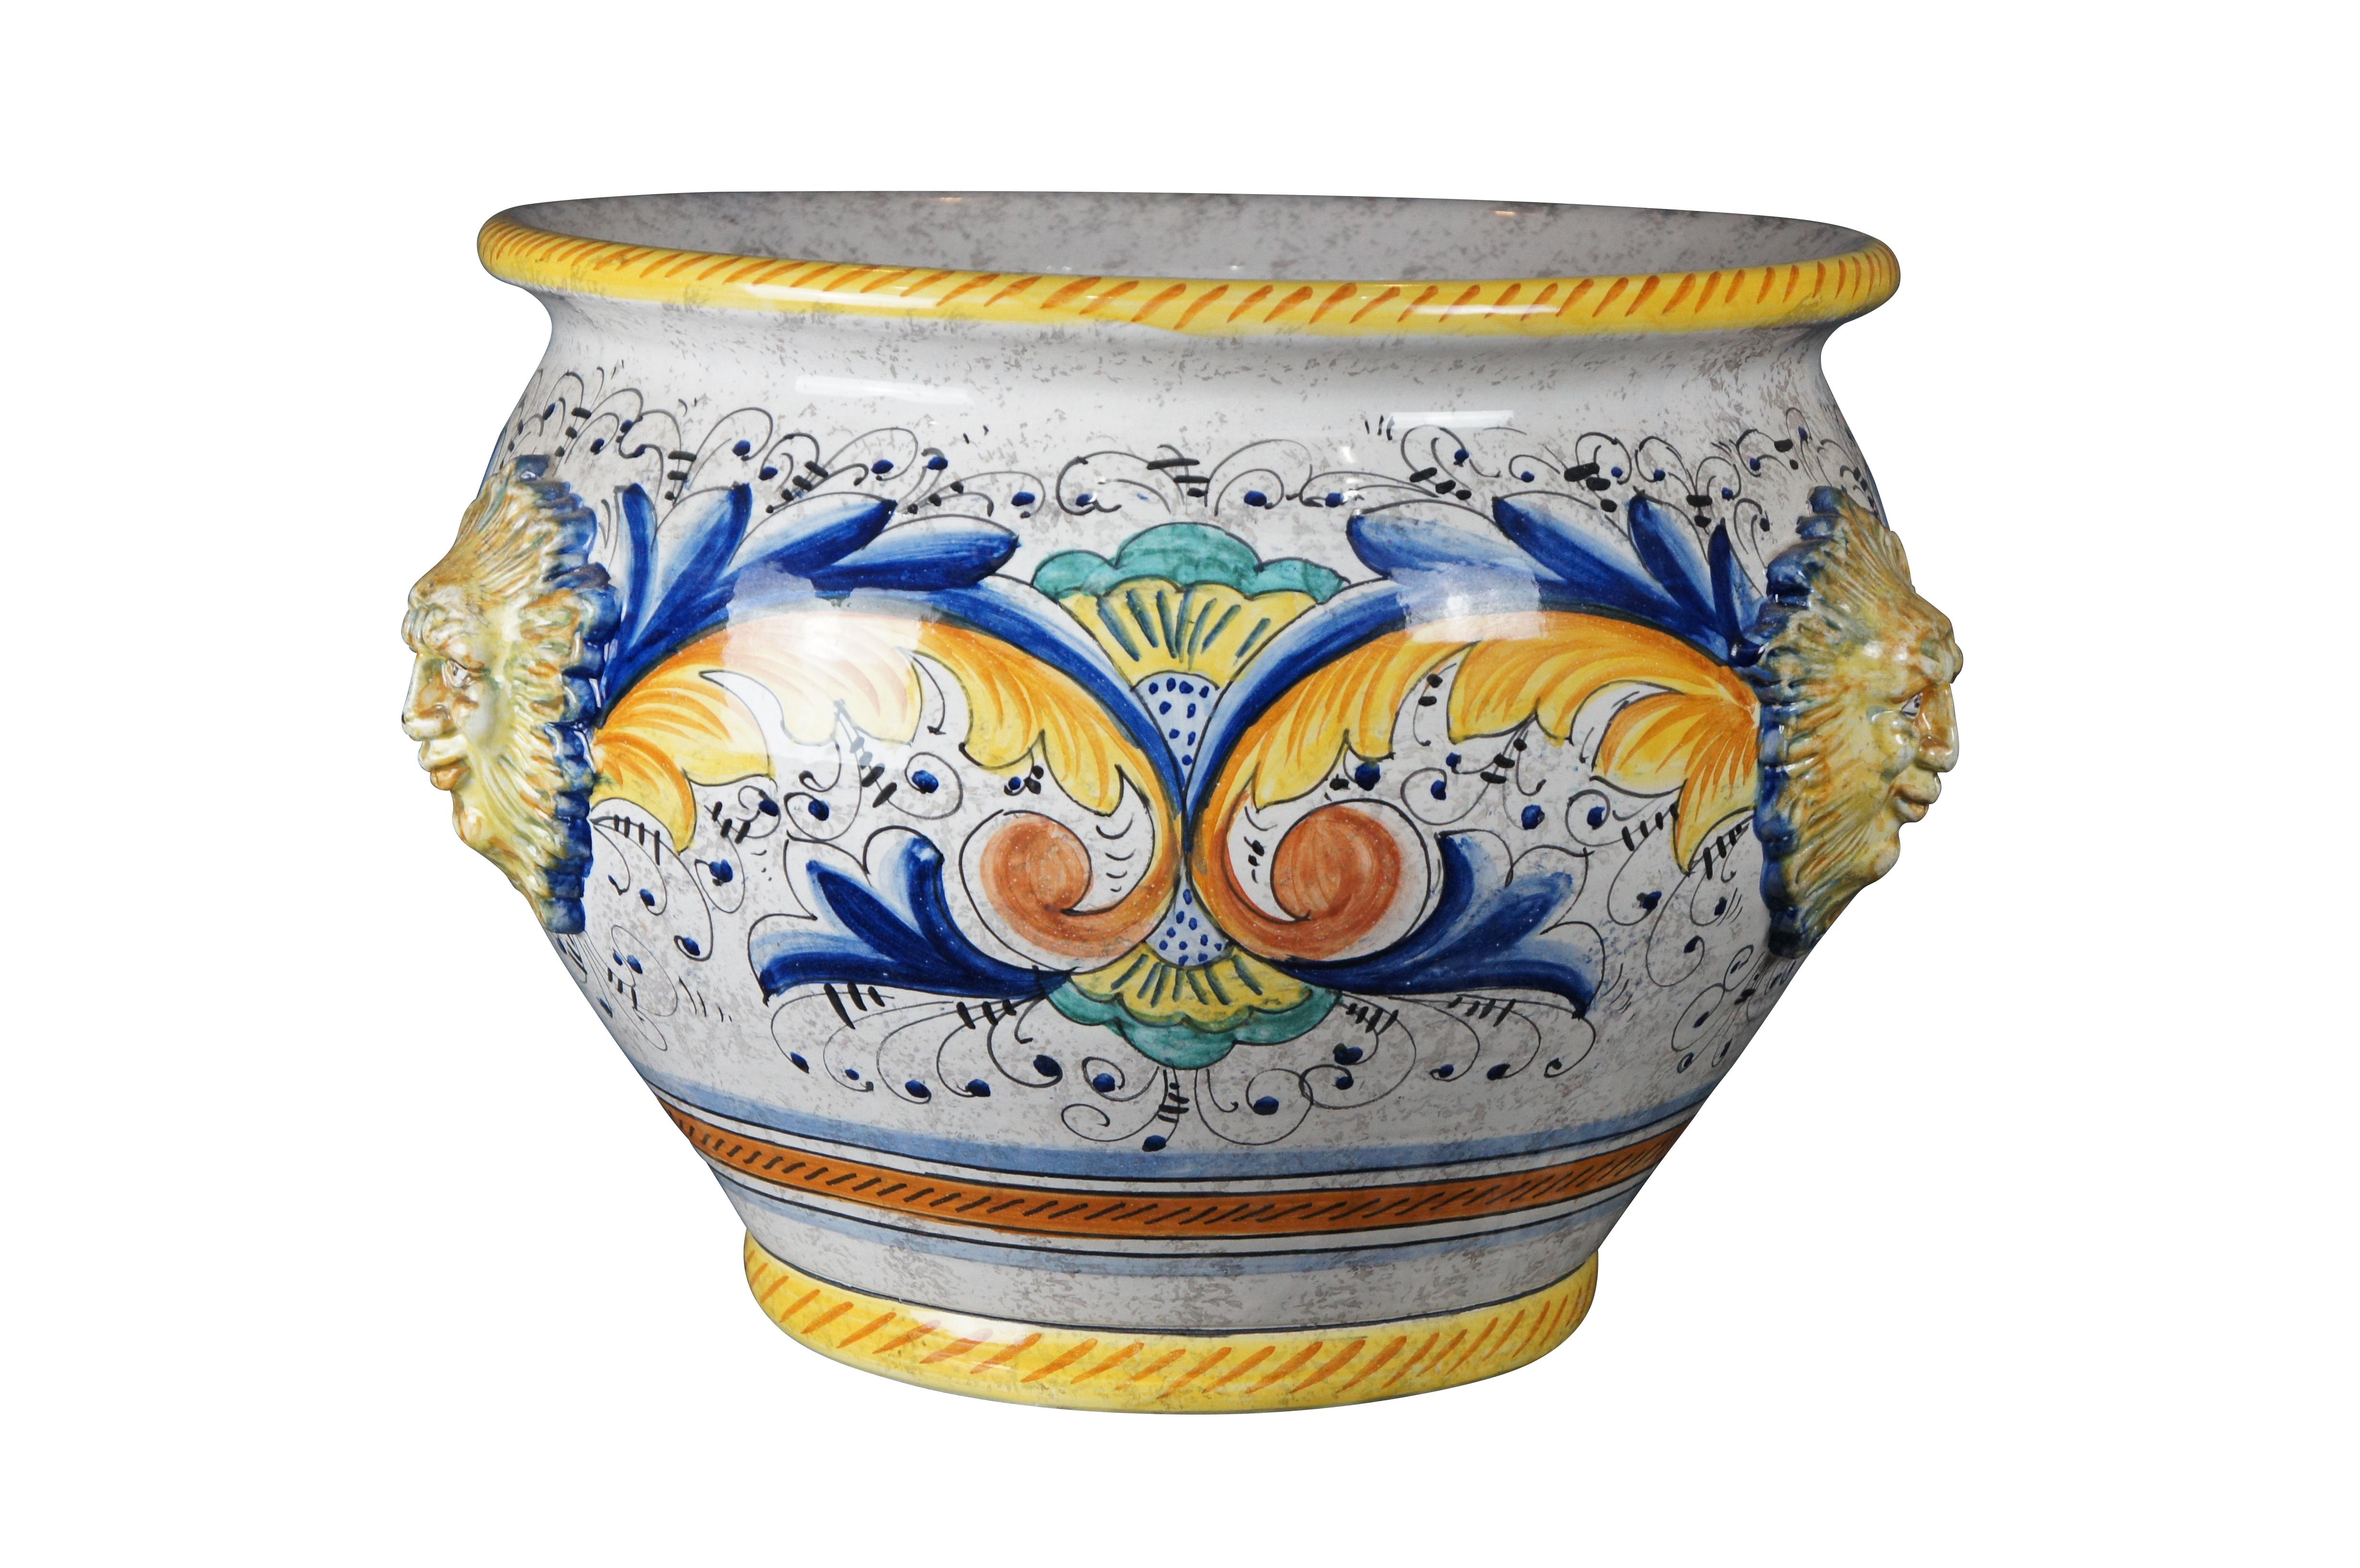 A beautiful 20th century jardiniere by Deruta pottery. Features a polychrome finish with elegant scrolling folitate motifs. The planter has three figural sunfaces along the exterior. 

Deruta Pottery was first produced in the 12th century, found its